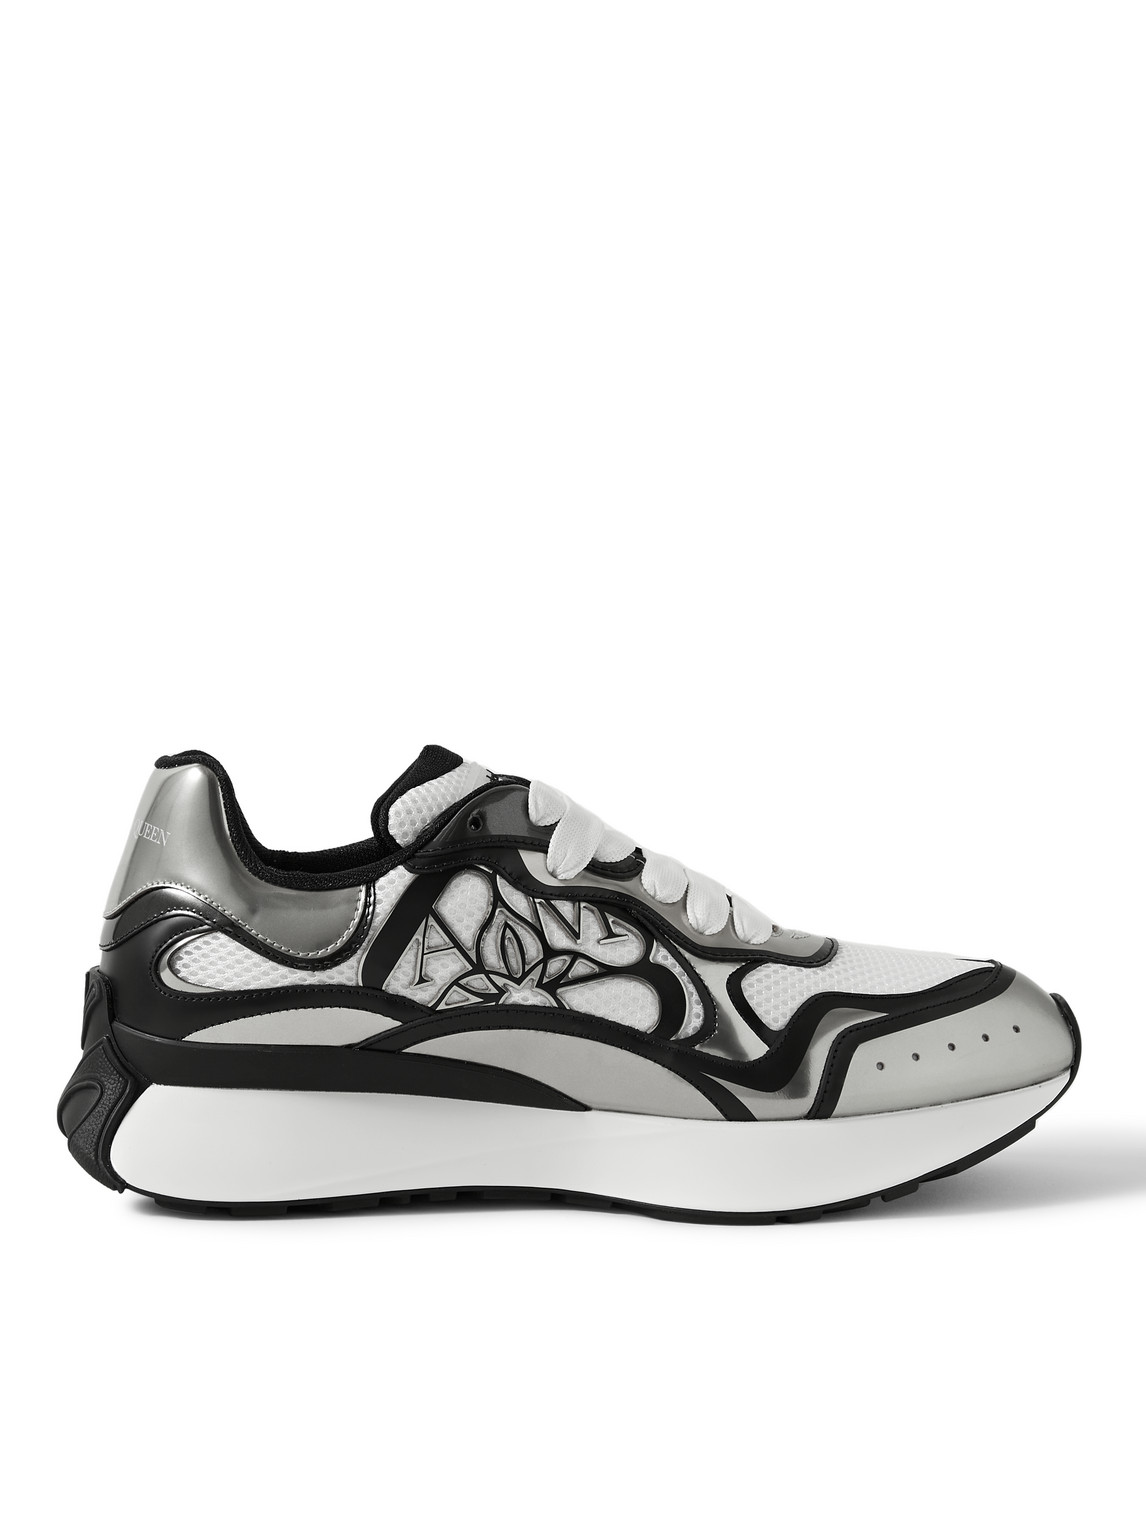 ALEXANDER MCQUEEN SPRINT RUNNER EXAGGERATED-SOLE MESH AND LEATHER SNEAKERS